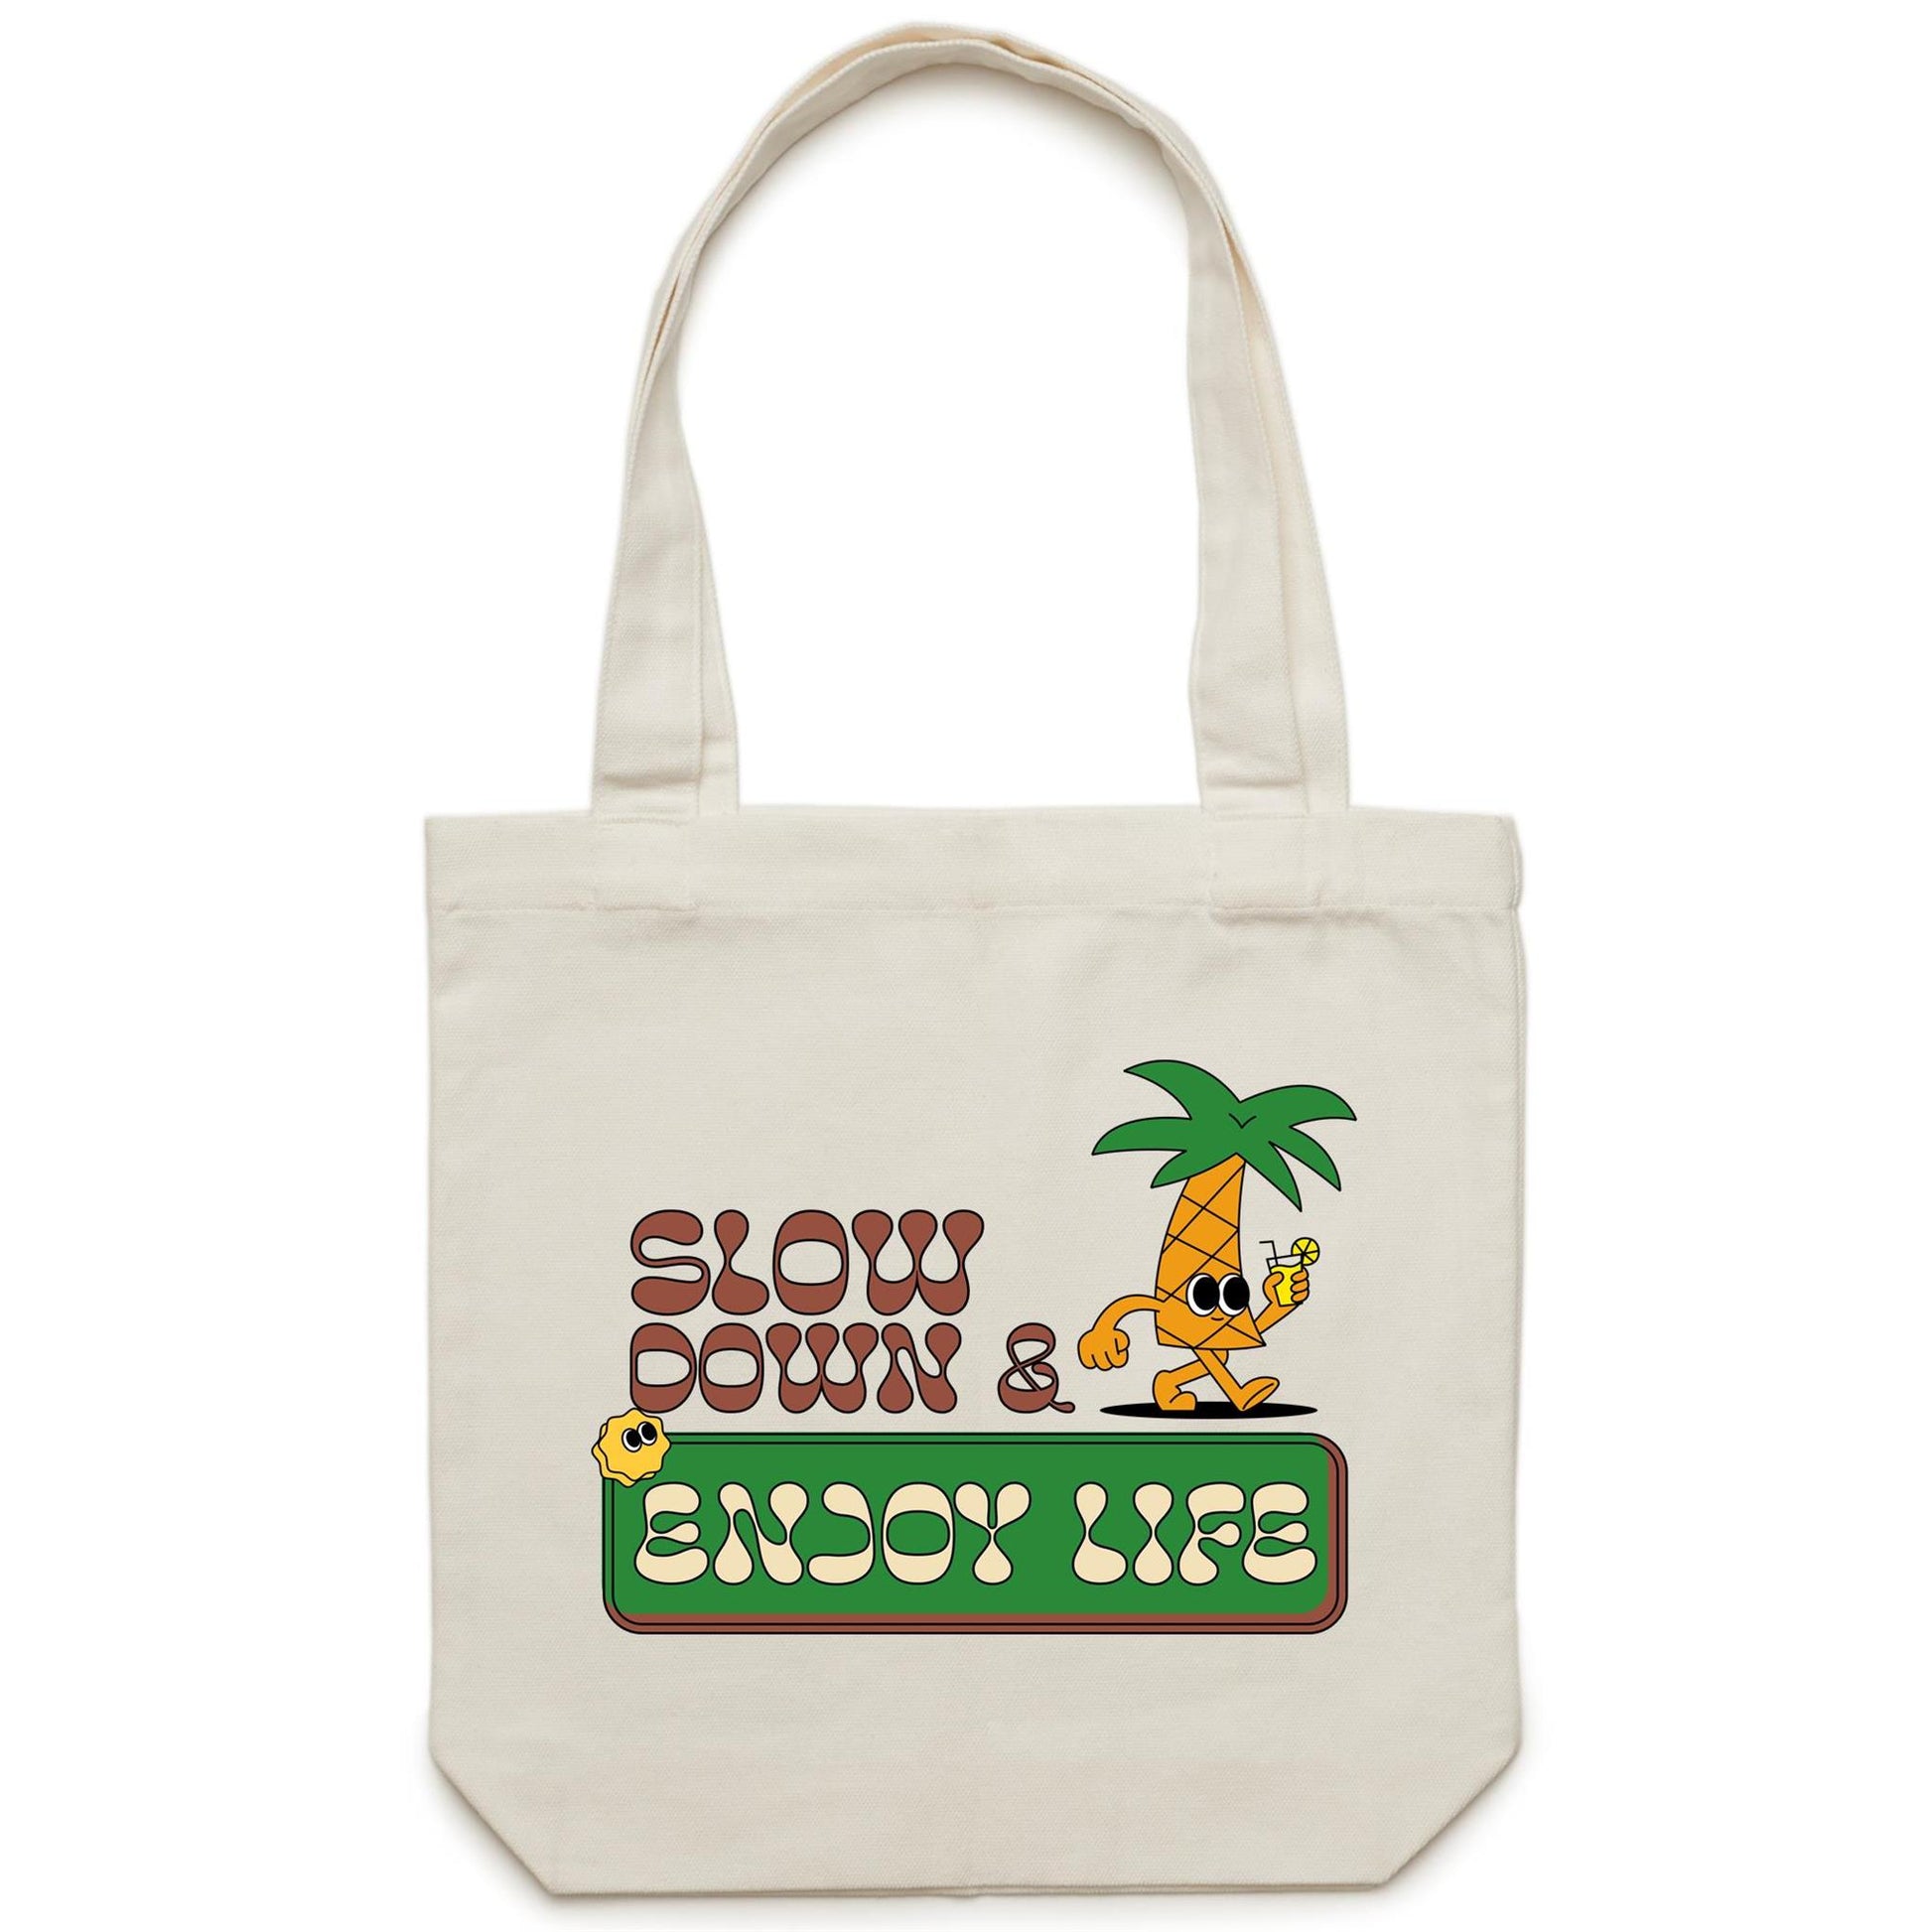 Slow Down & Enjoy Life - Canvas Tote Bag Cream One Size Tote Bag Motivation Summer